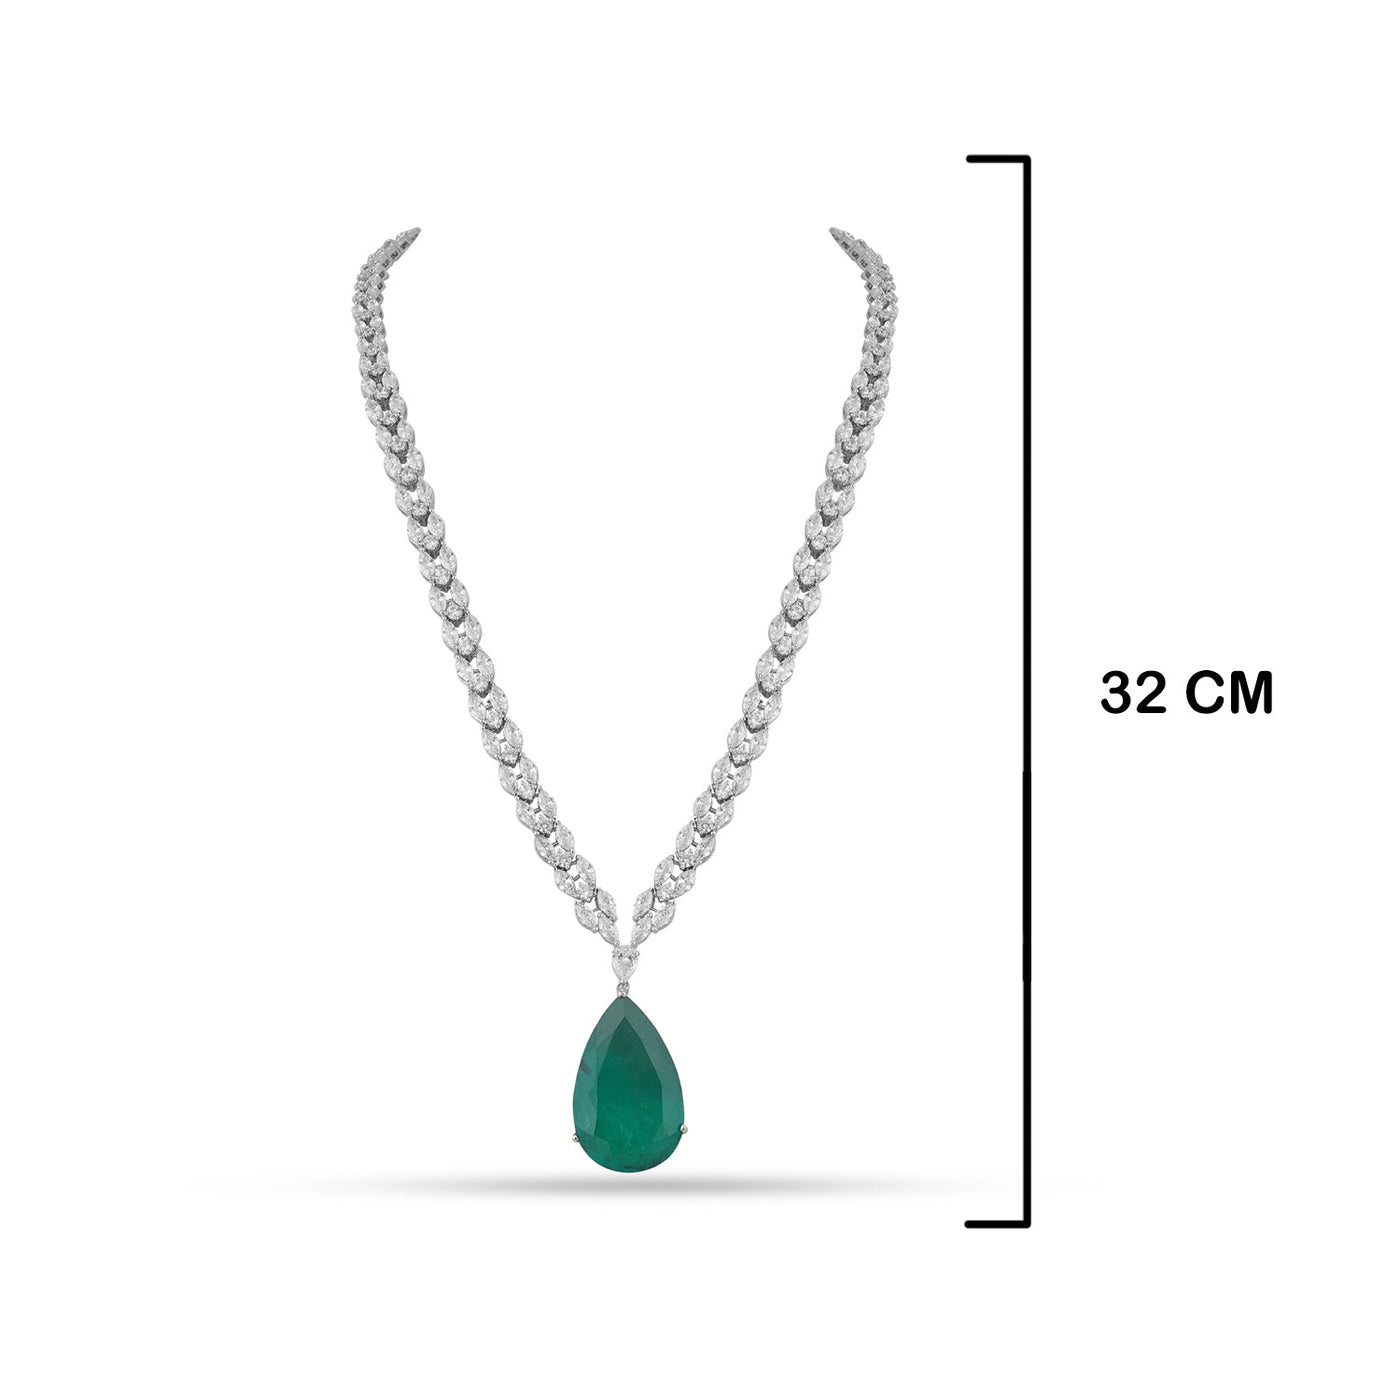  Emerald Green Single Stone Necklace with measurements in cm.